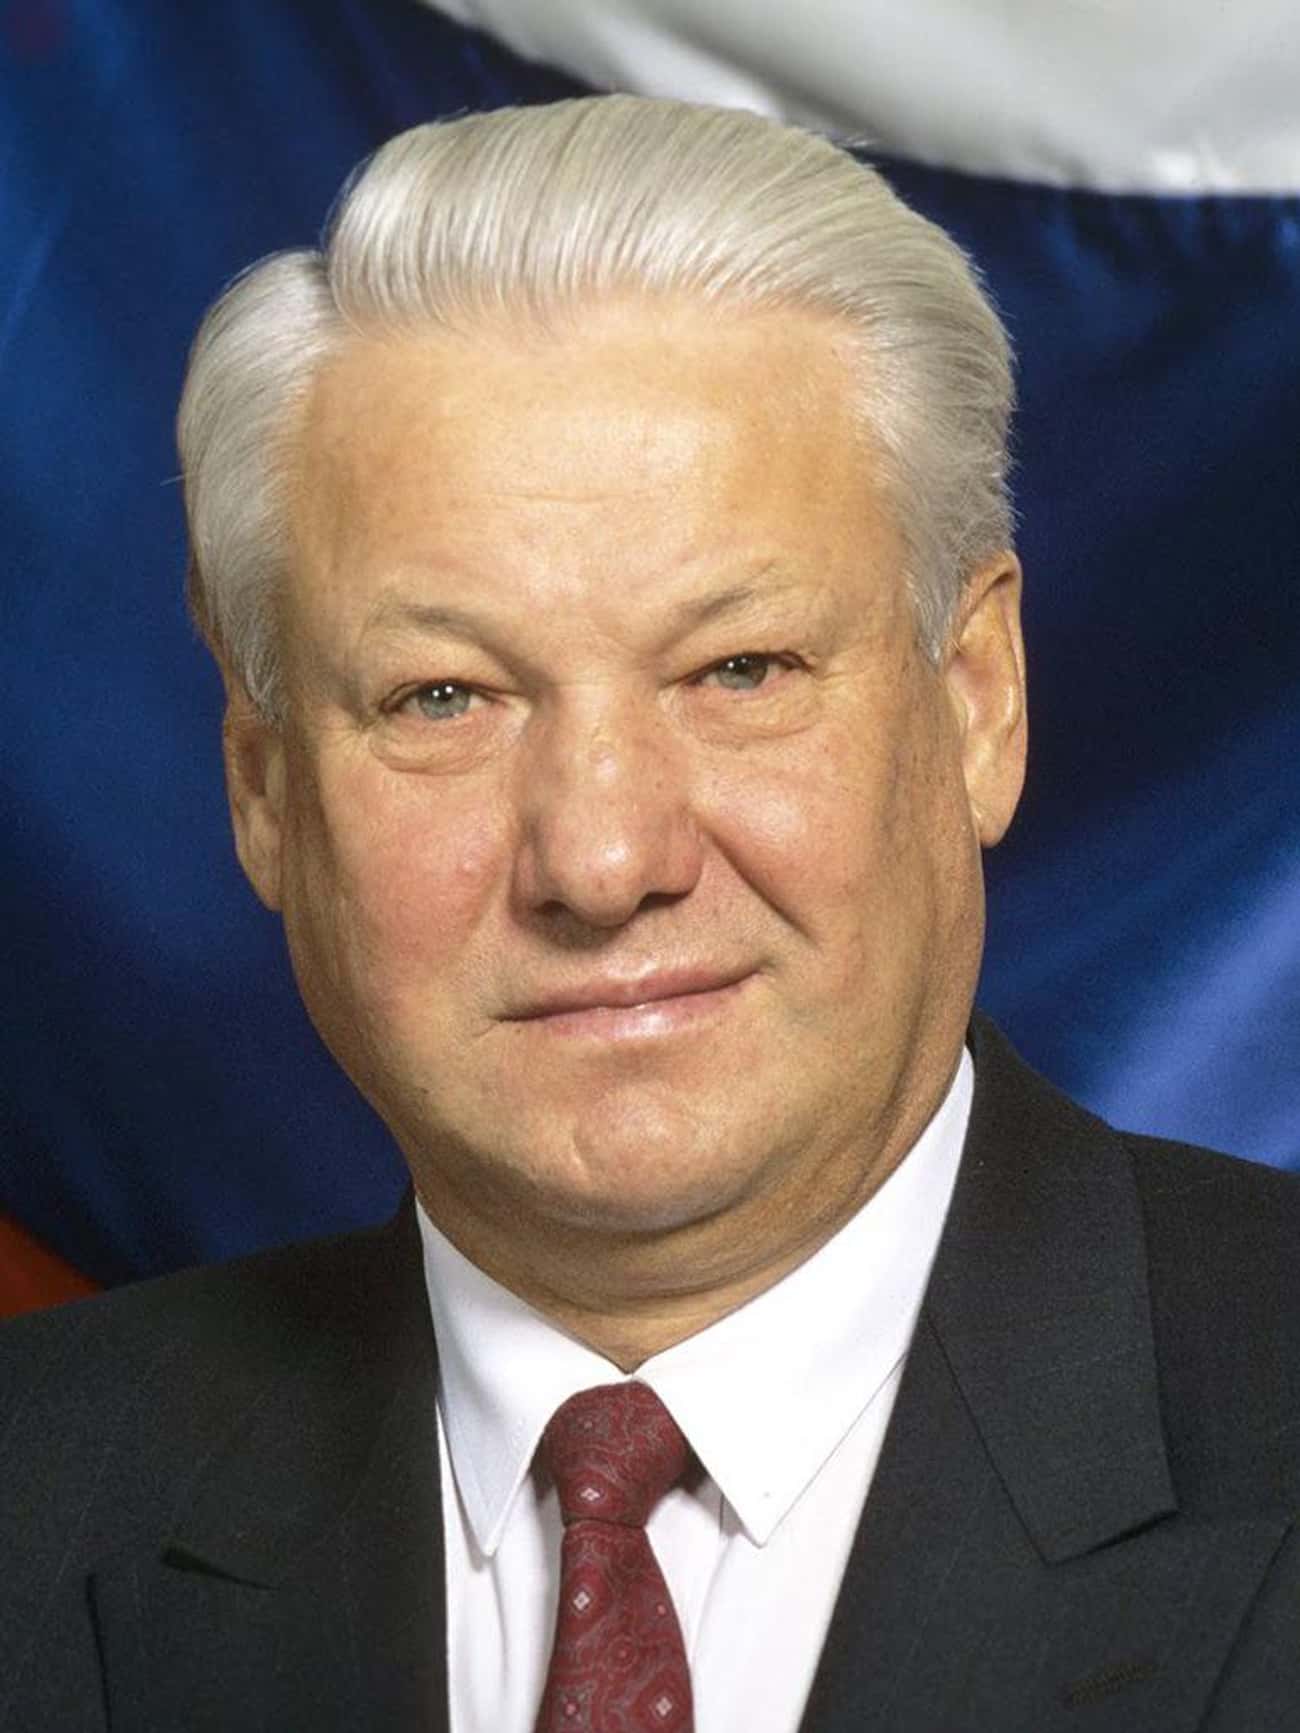 Boris Yeltsin Got So Drunk He Thought He Could Conduct An Orchestra